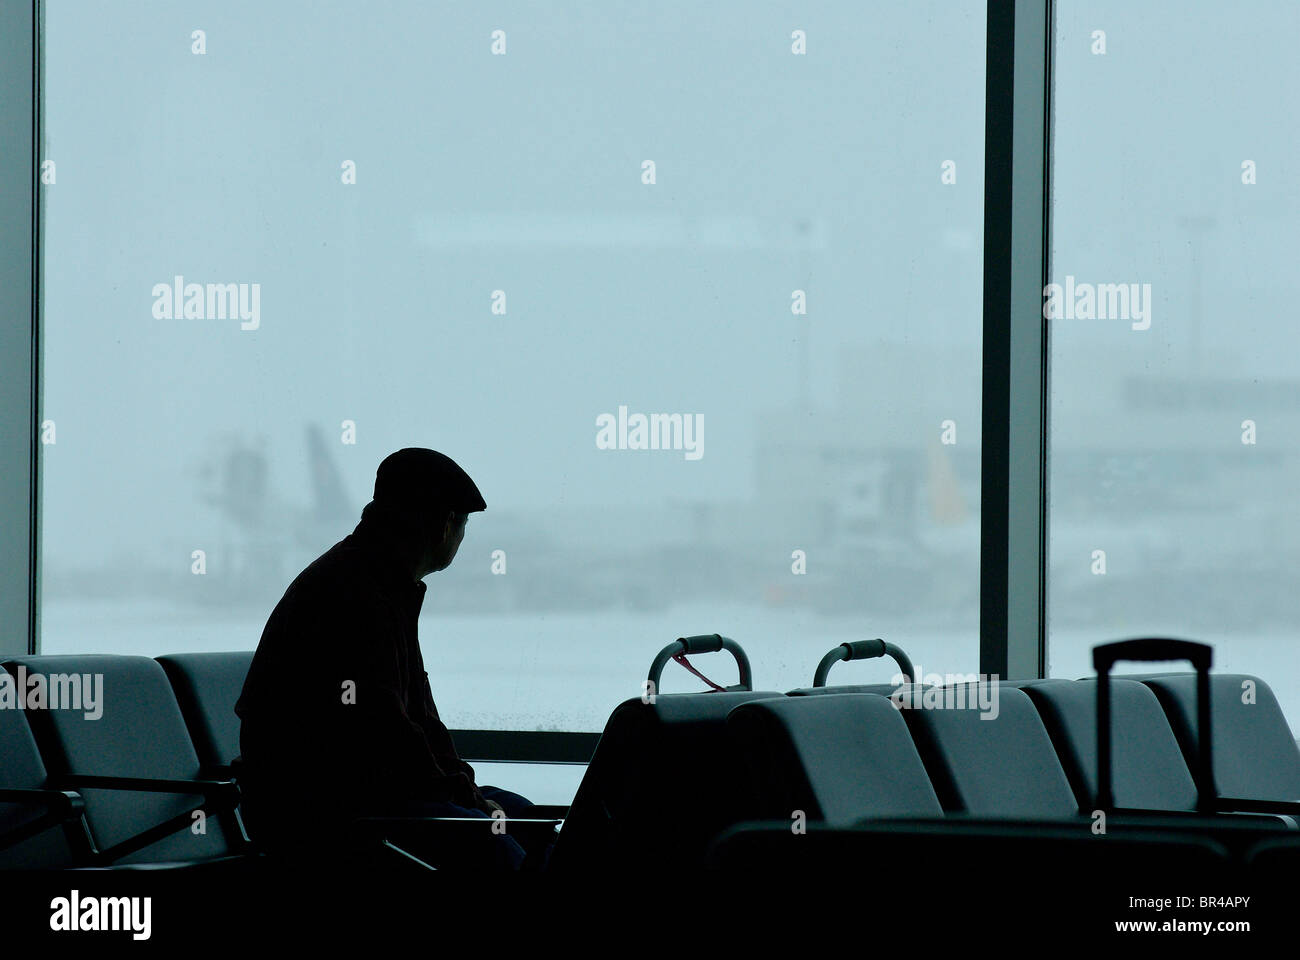 A passenger waiting in an airport. Stock Photo